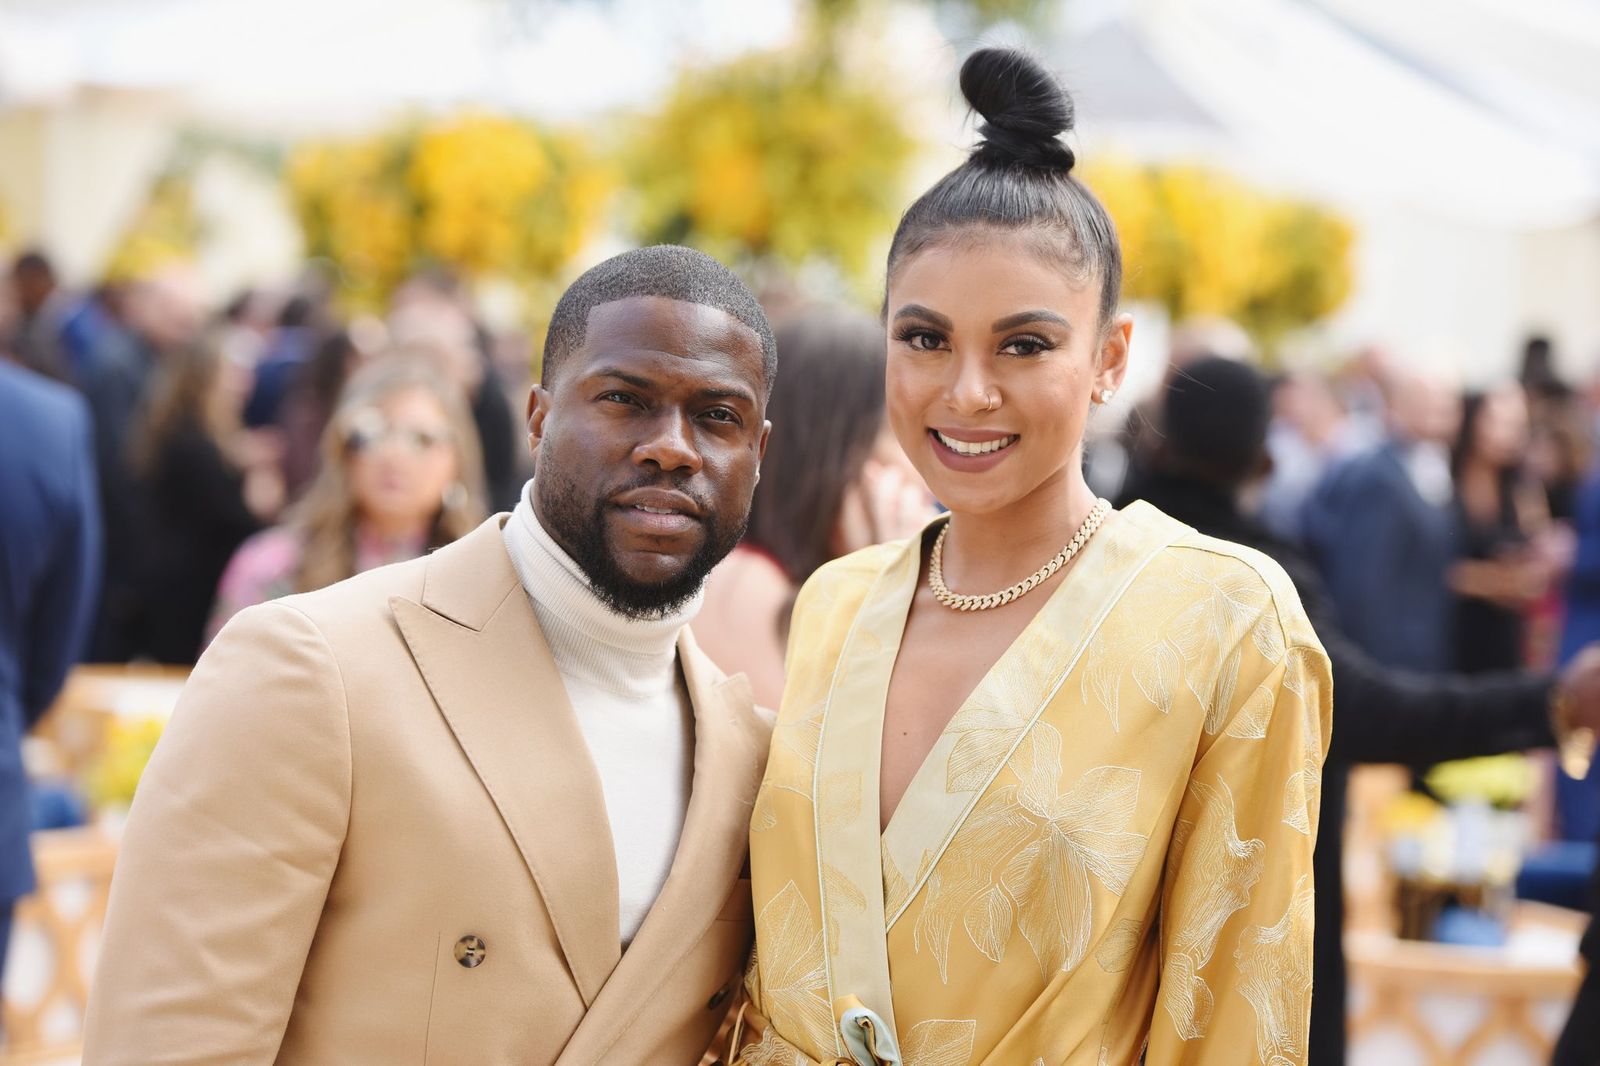 Kevin Hart and Eniko Parrish at 2019 Roc Nation THE BRUNCH on February 9, 2019 | Photo: Getty Images